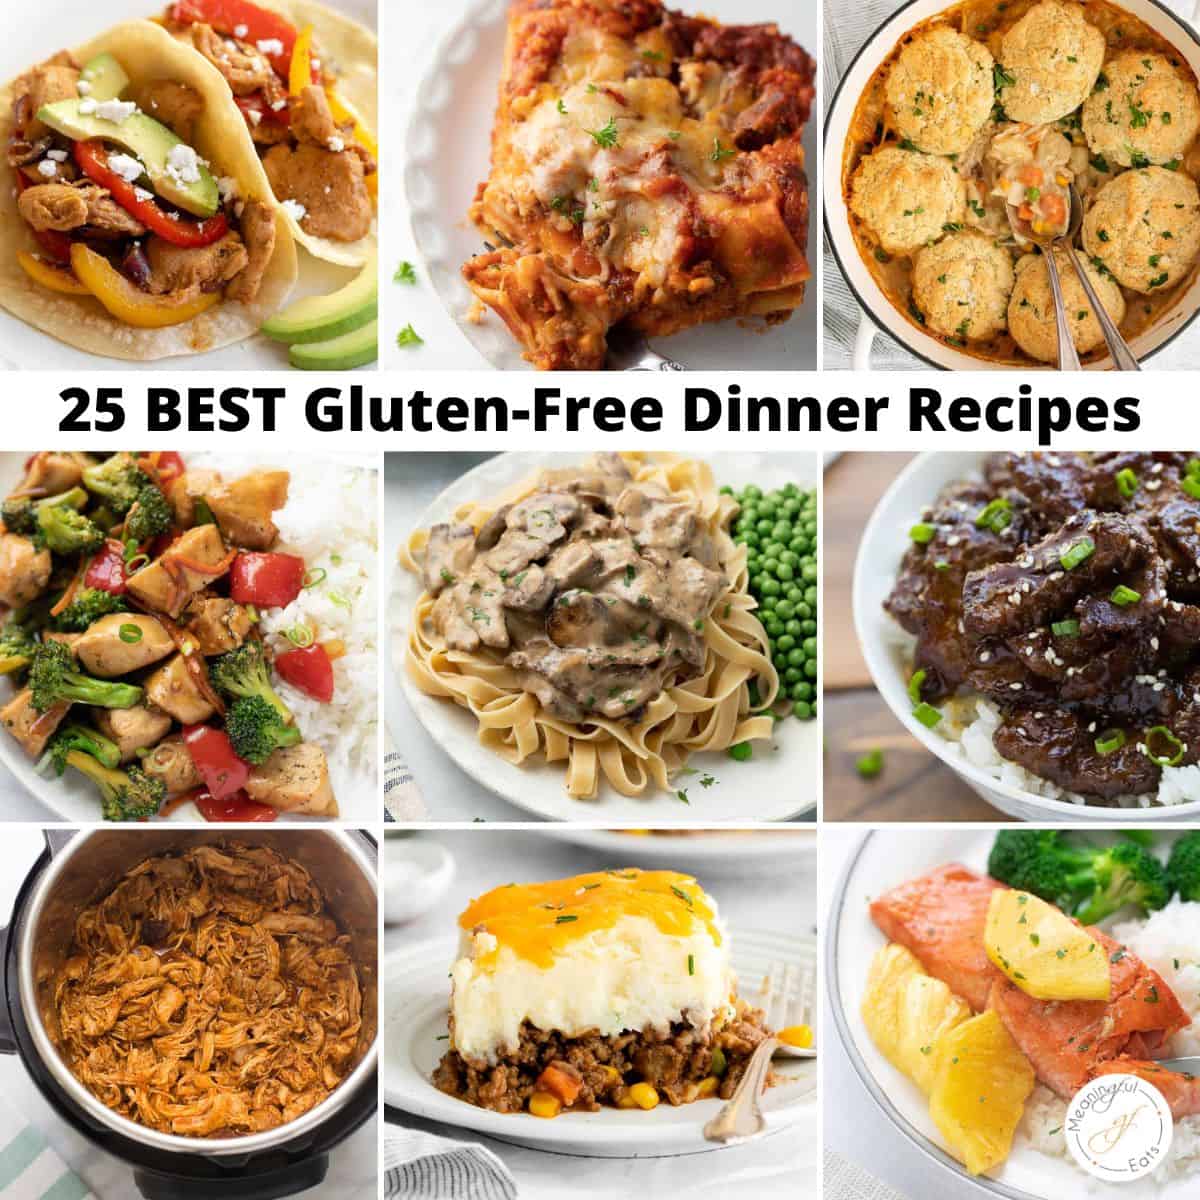 Top 18 BEST Gluten Free Dinner Recipes for 18   Meaningful Eats